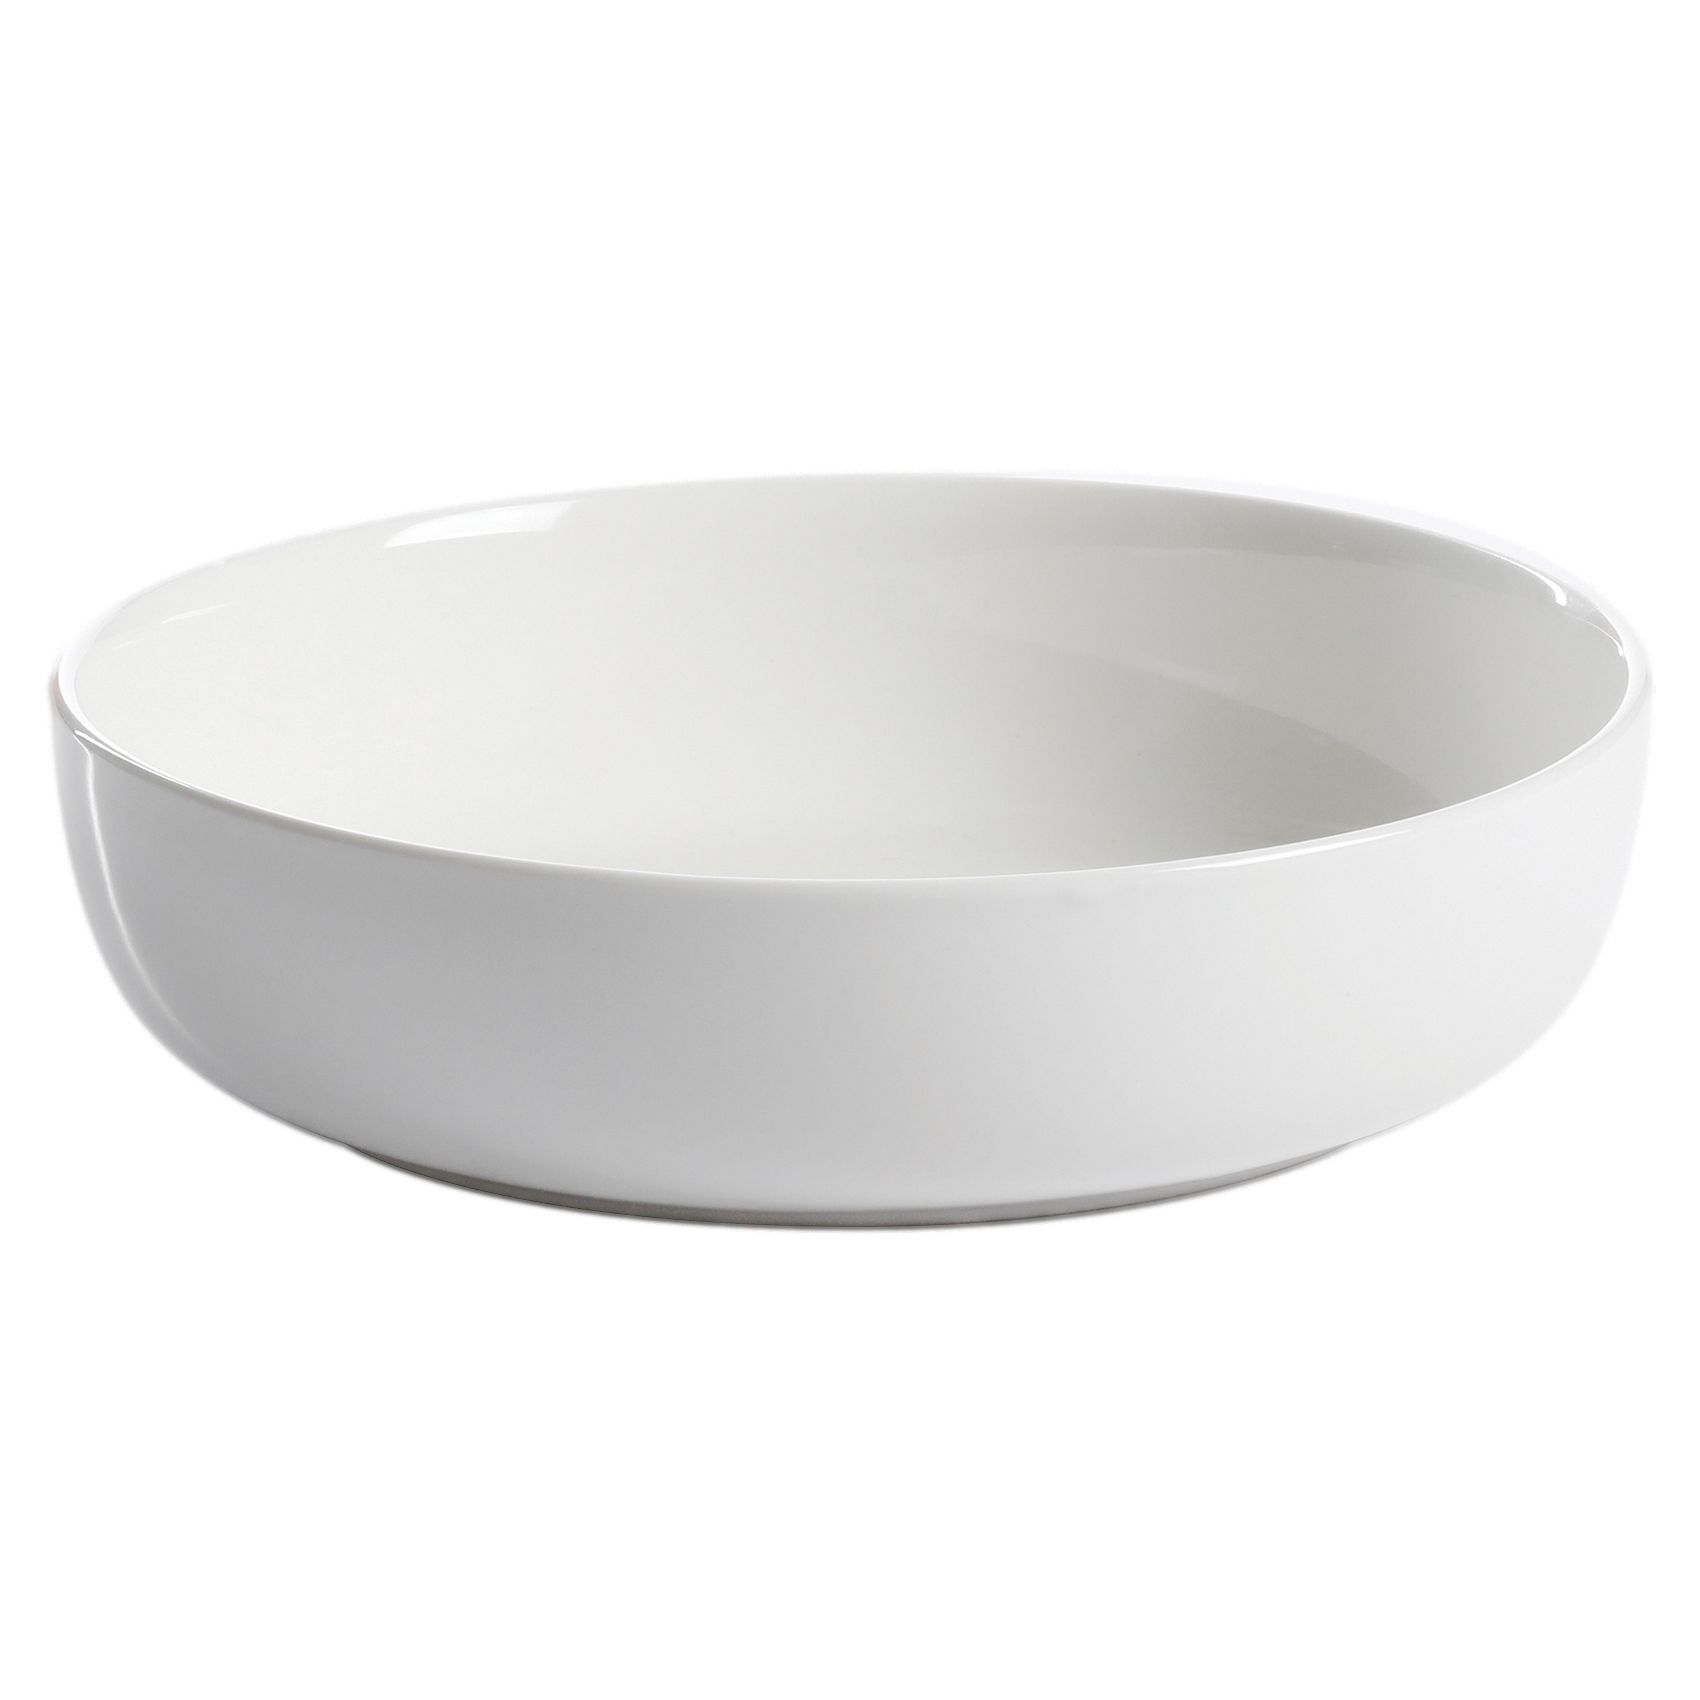 SET OF 2 - Large 16 Inch Wide Stainless Steel Flat Rim Flat Base Mixing Bowl